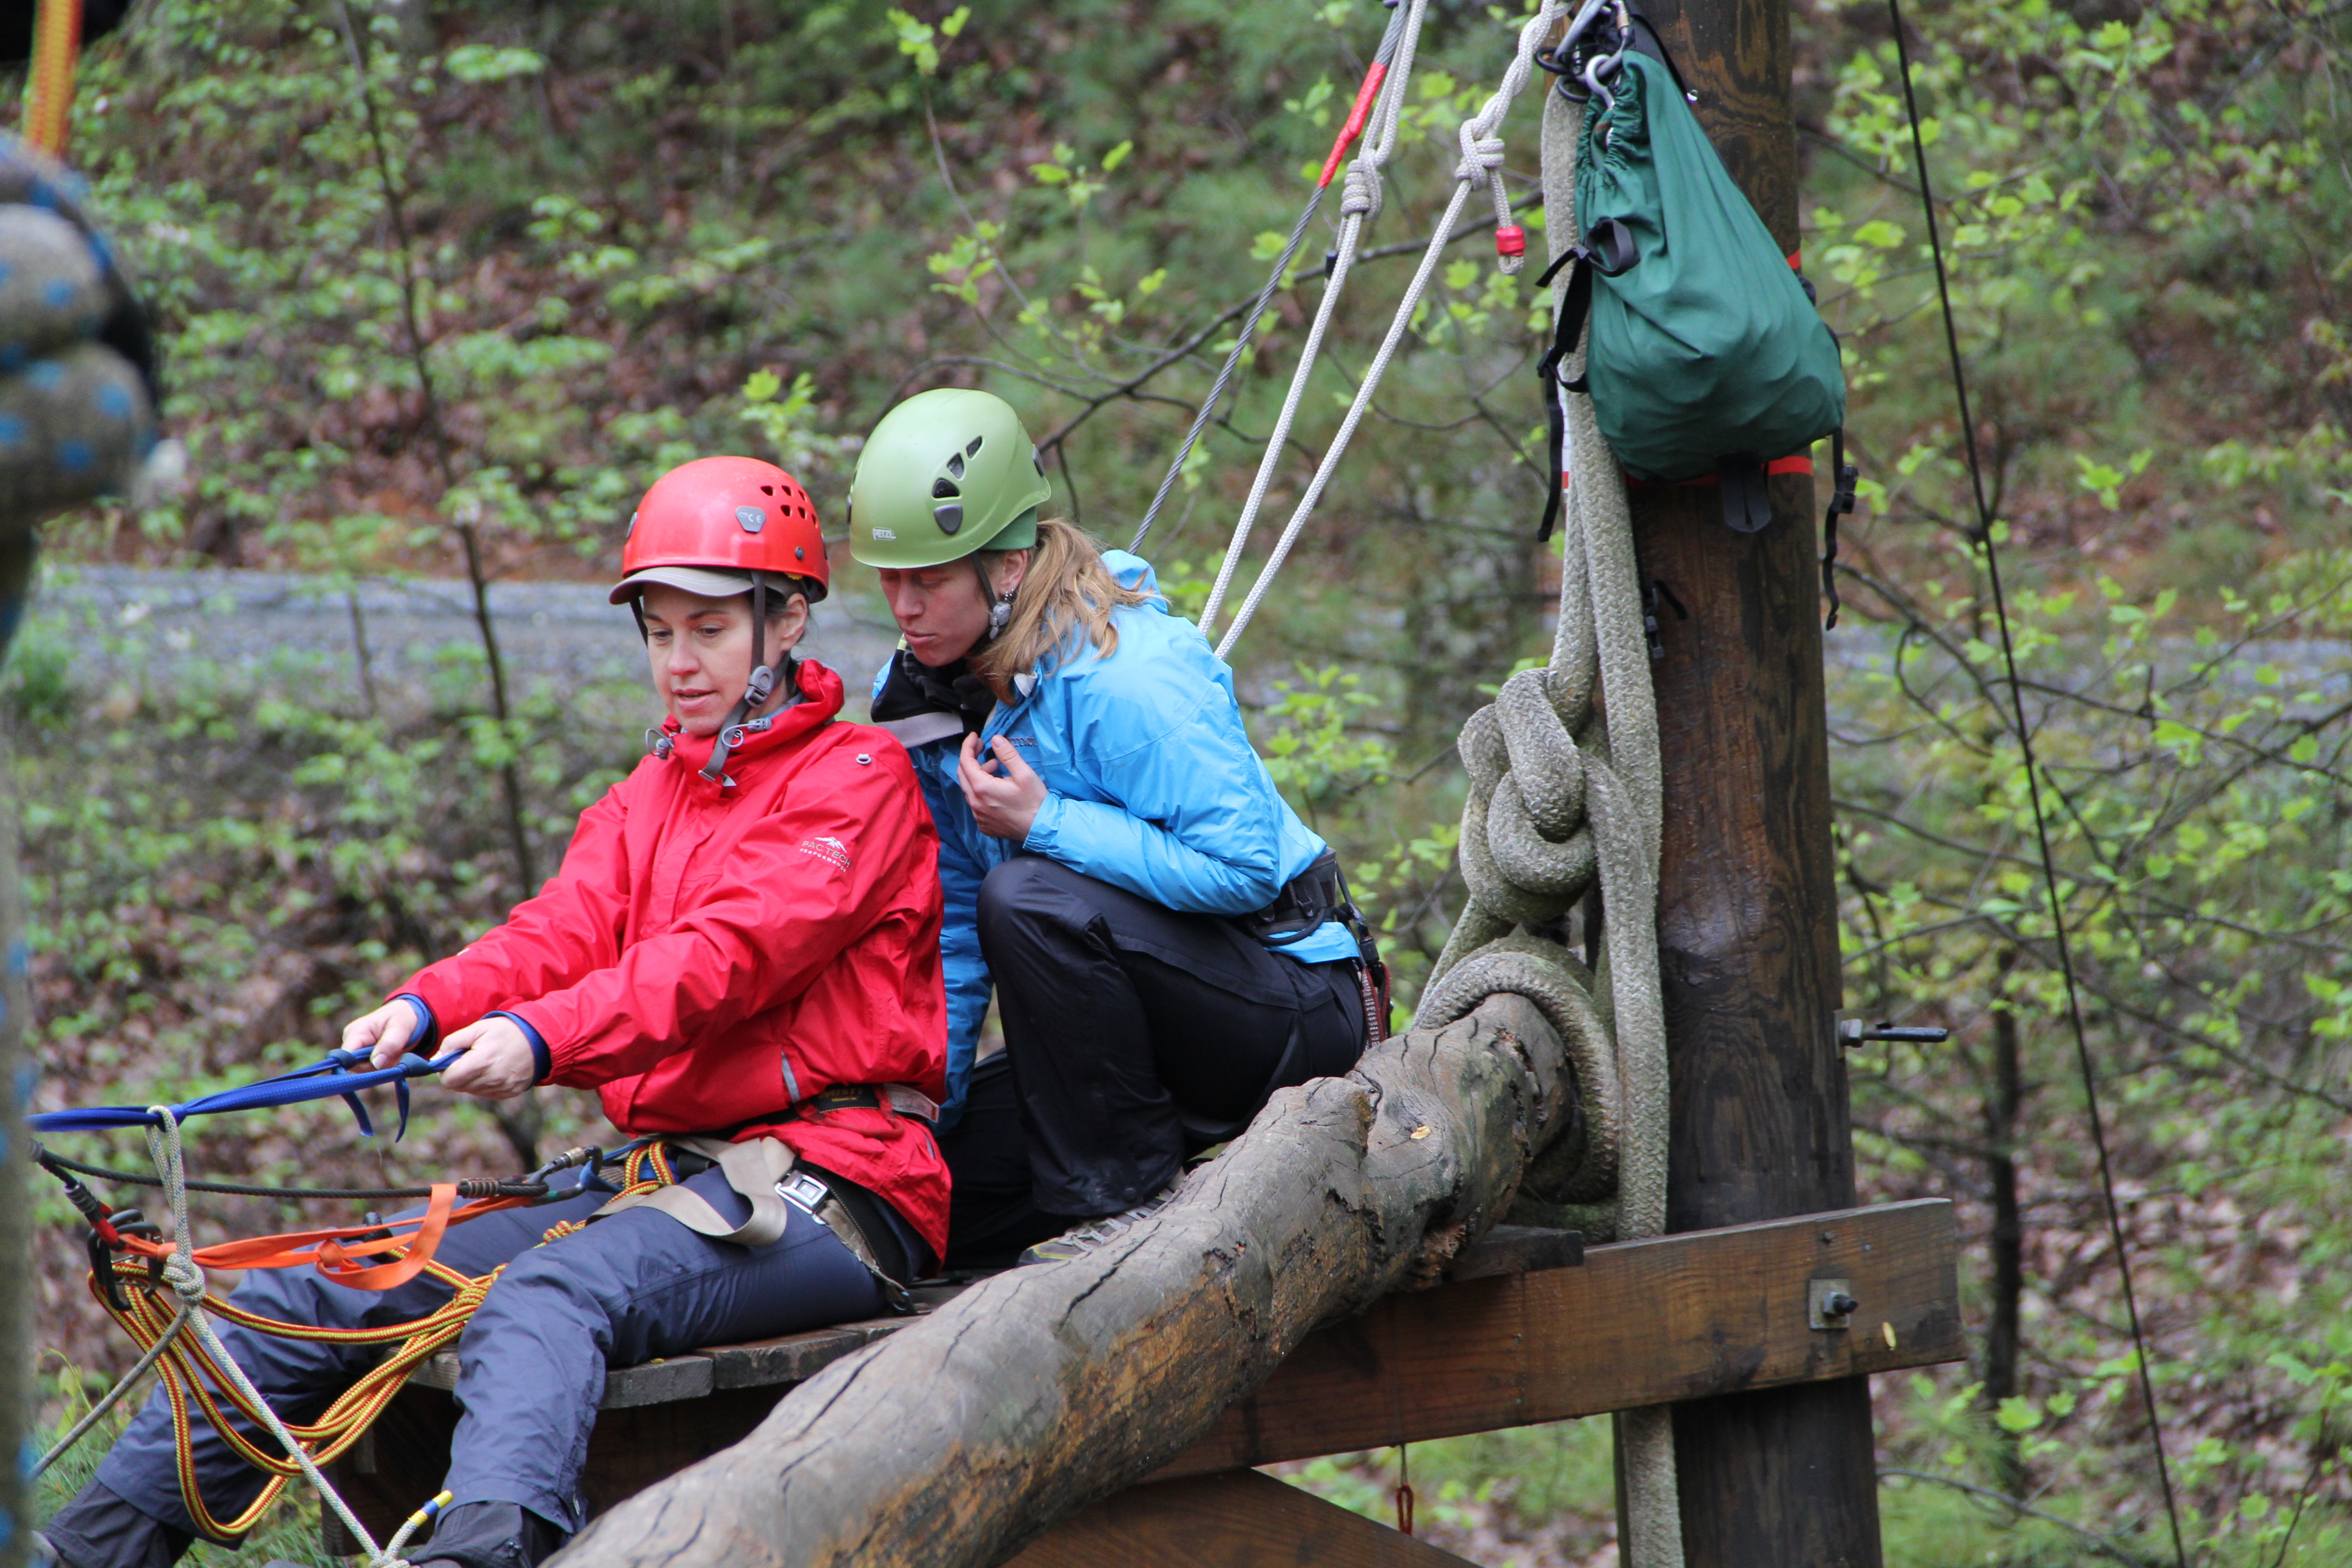 High ropes course challenge